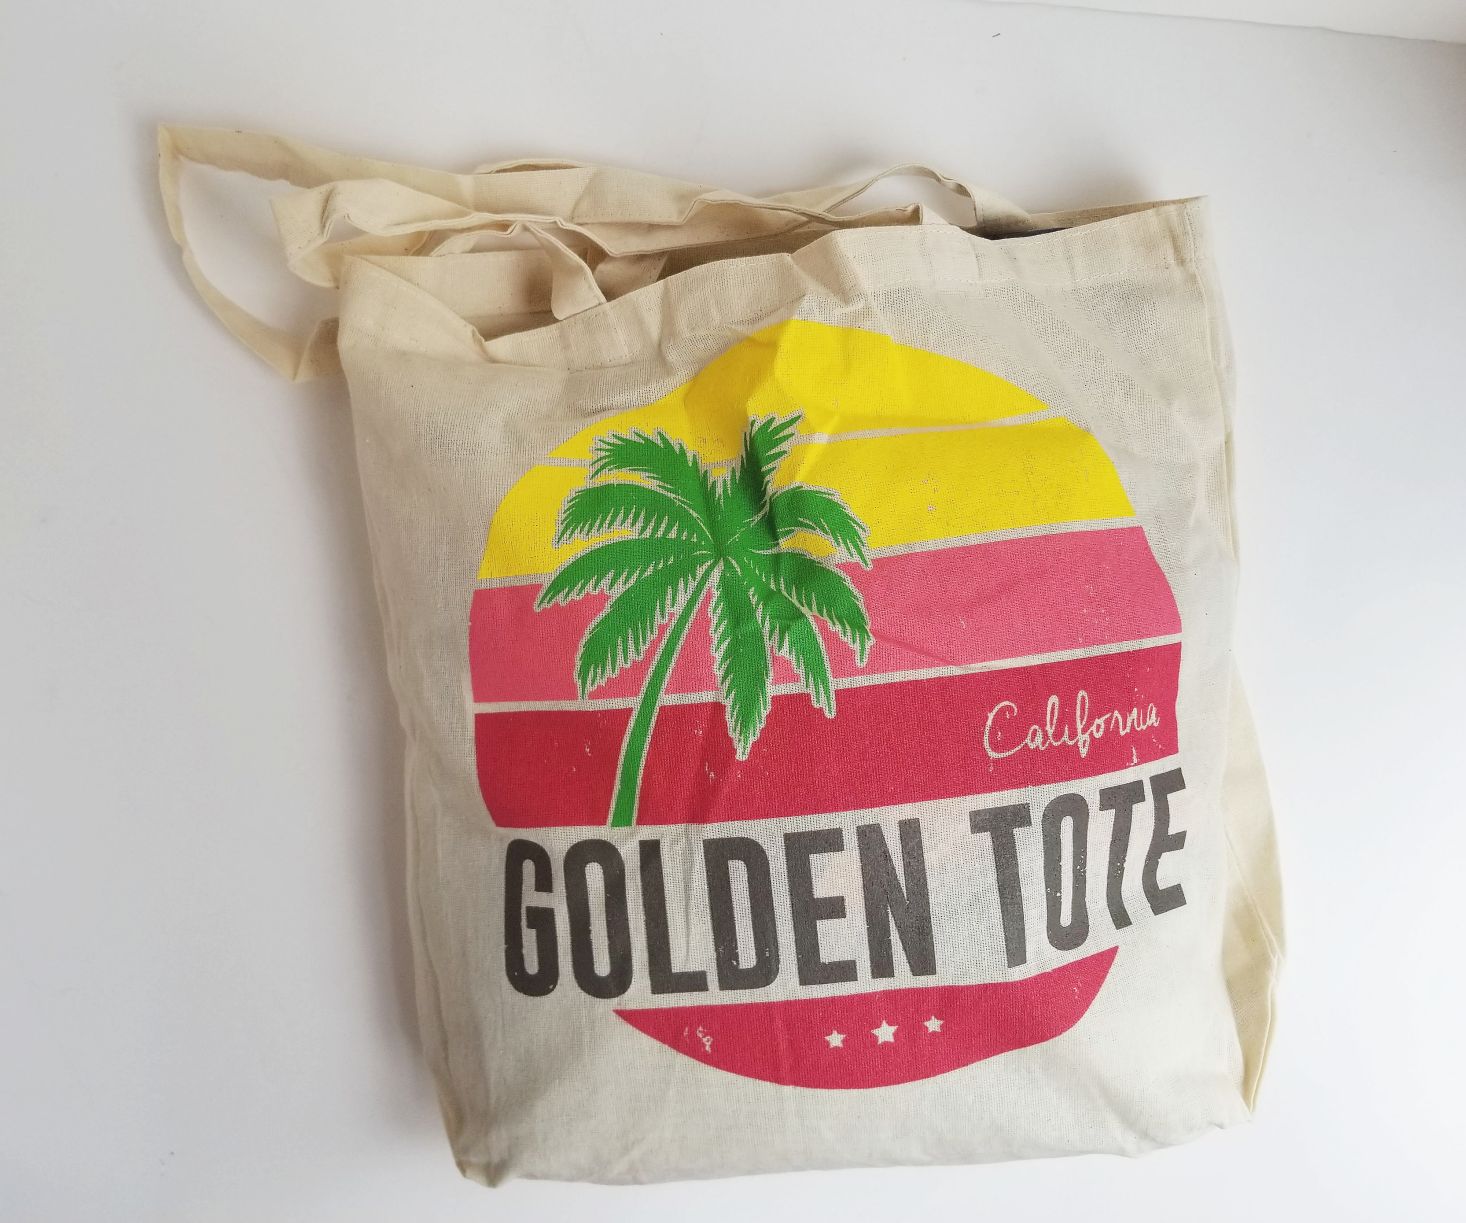 Golden Tote $149 Clothing Tote Review – July 2018